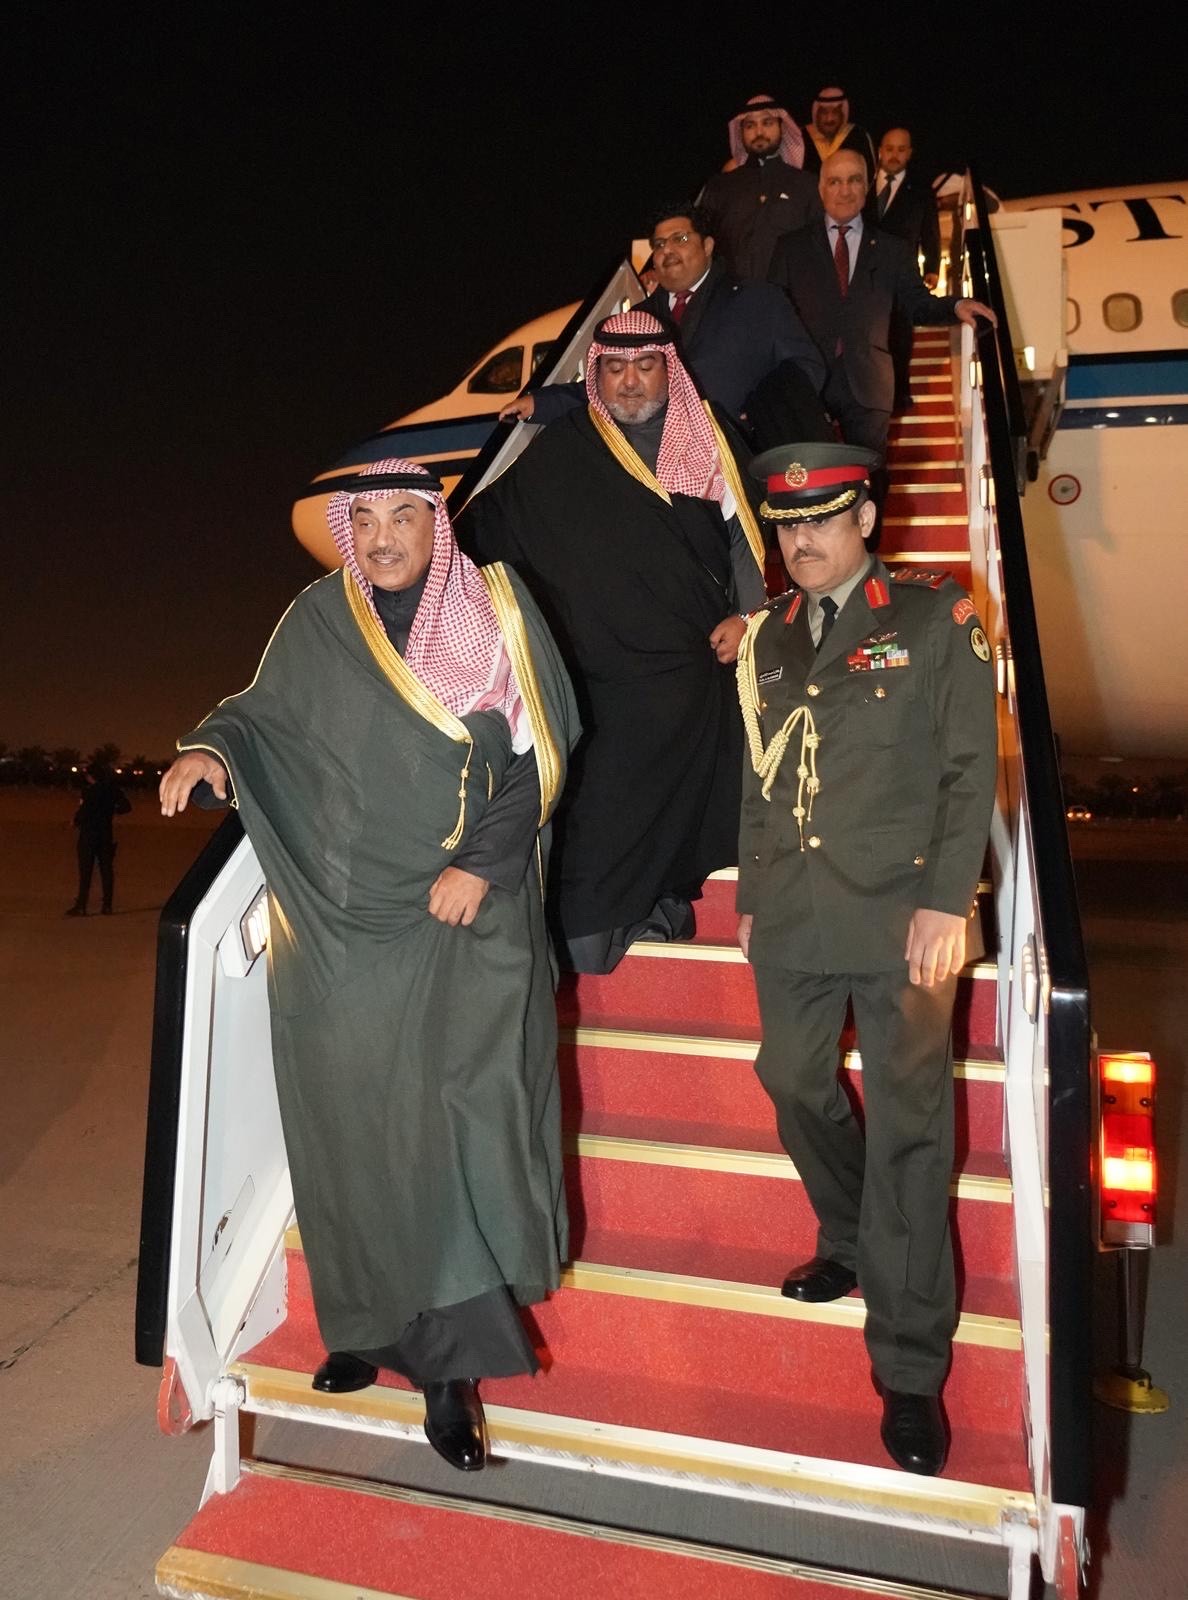 His Highness the Prime Minister returns home